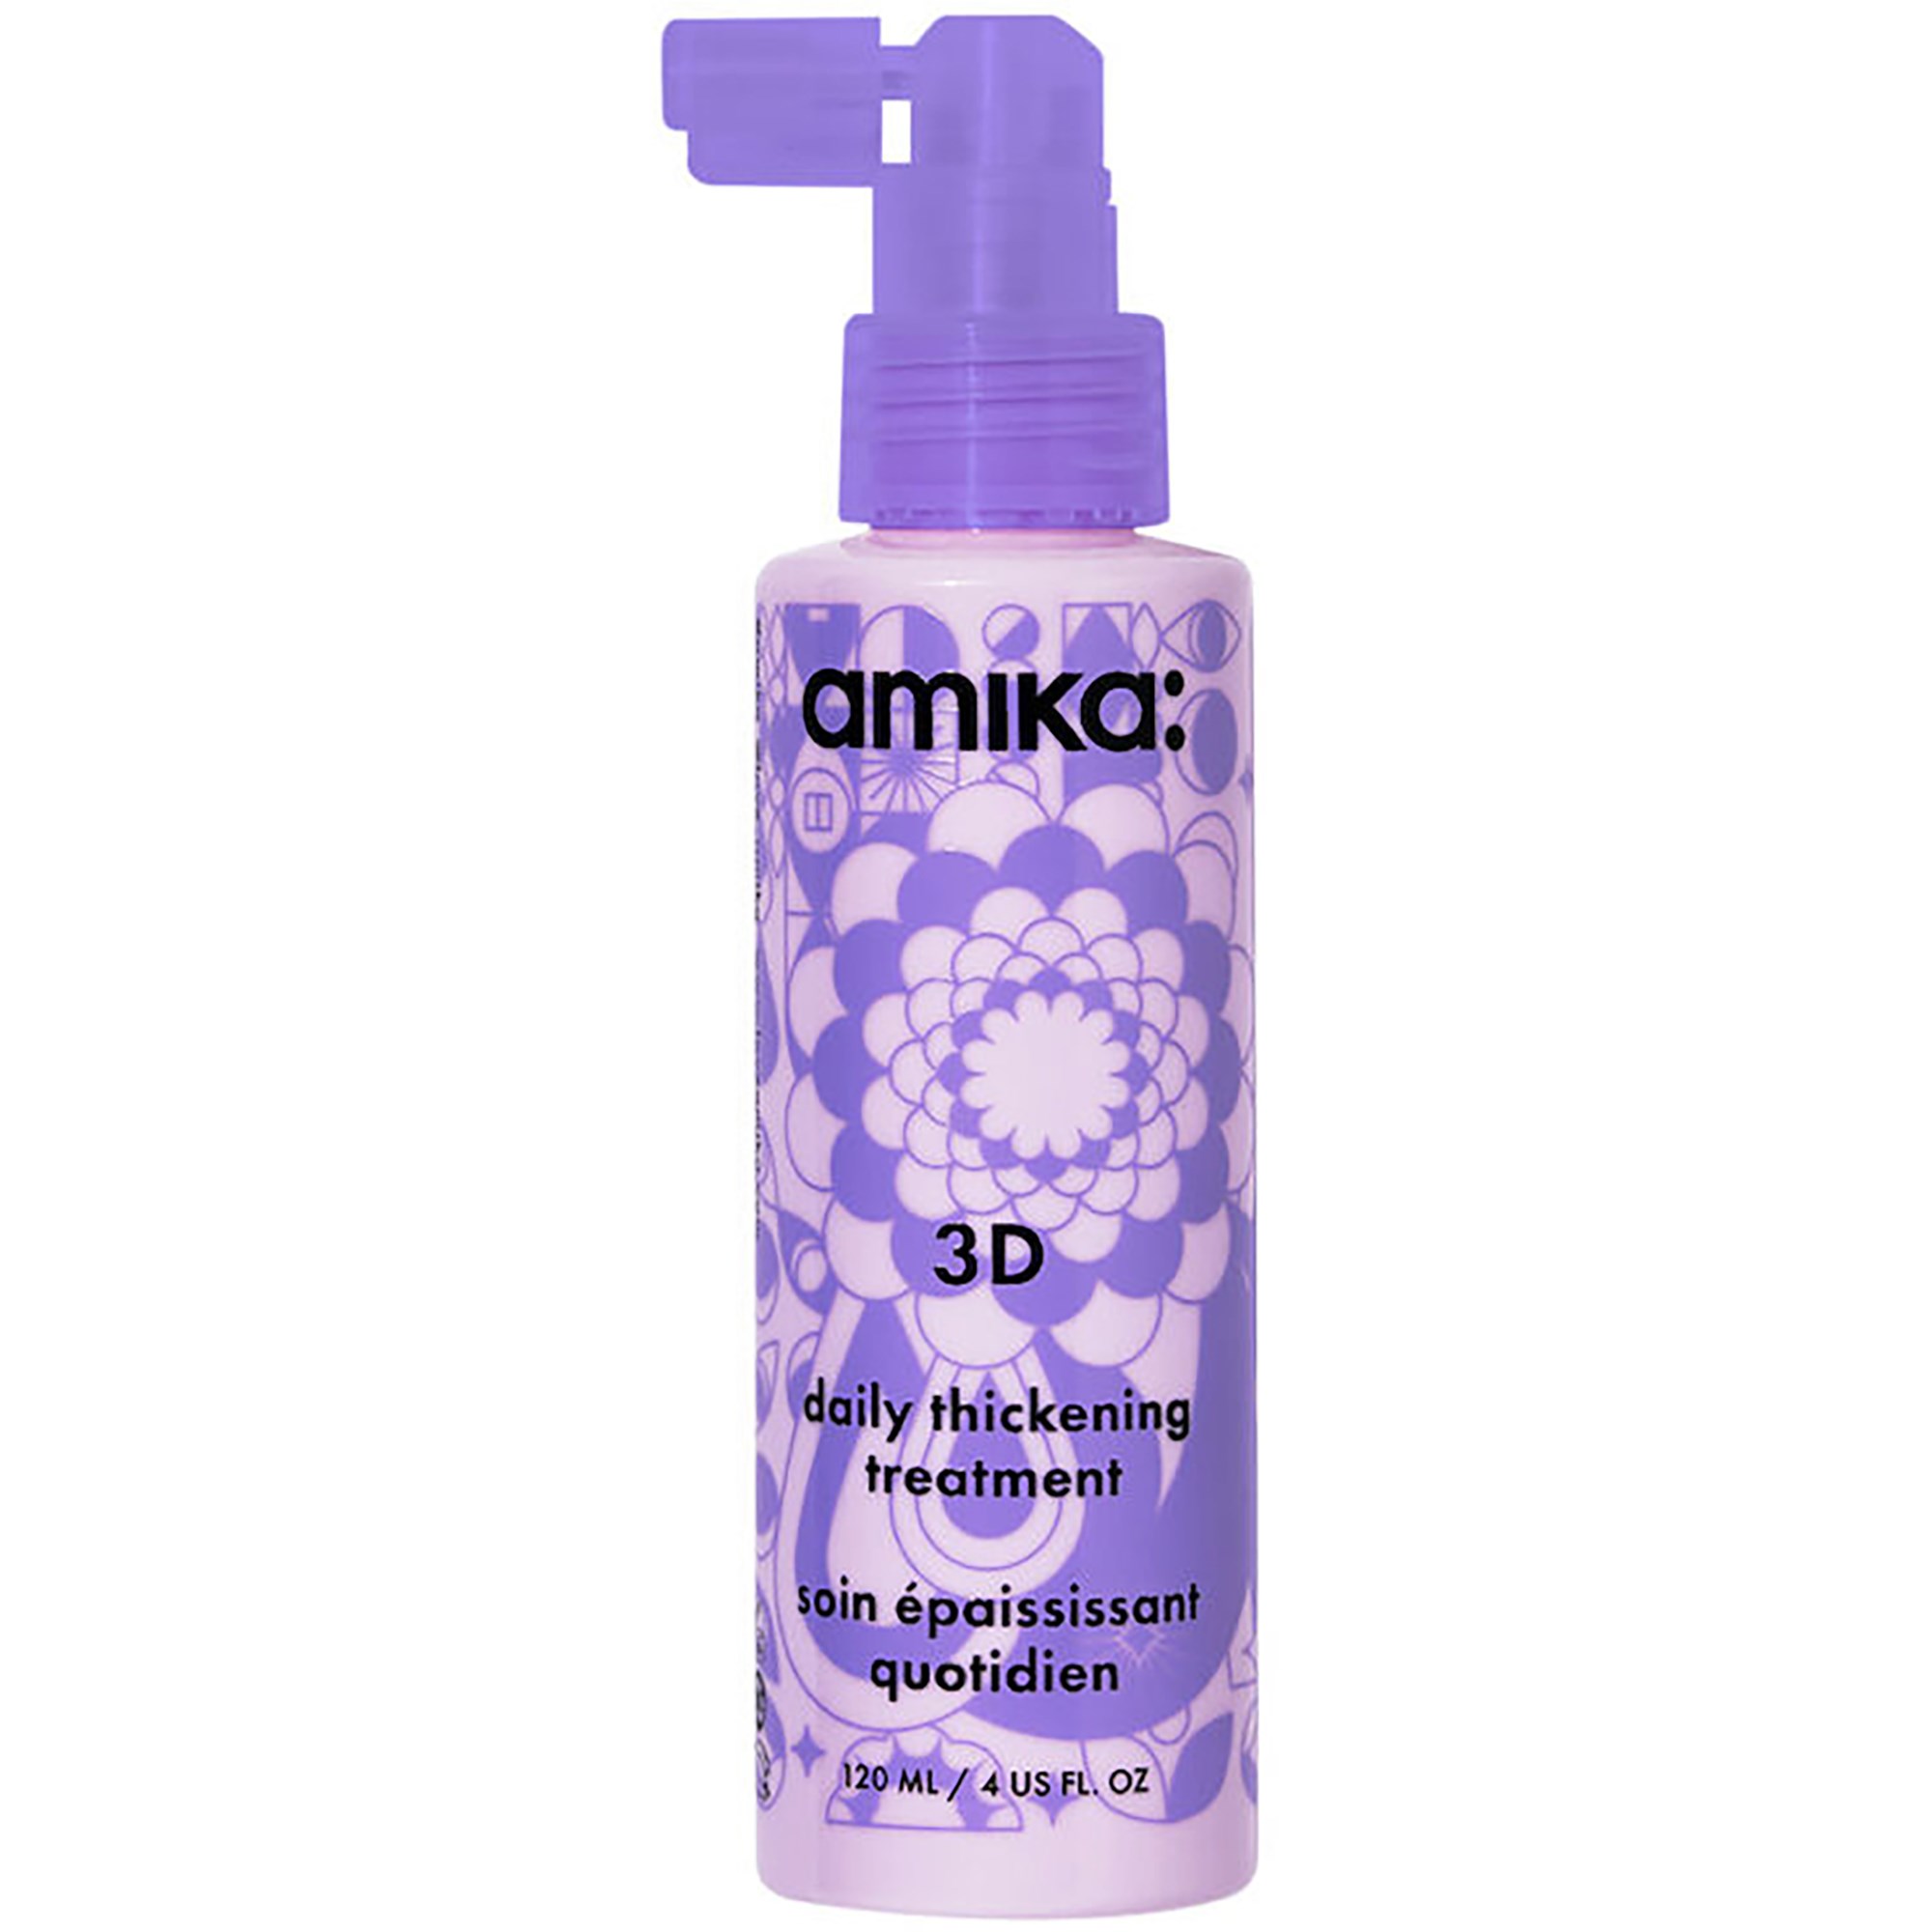 Amika 3D Daily Thickening, 120 ml